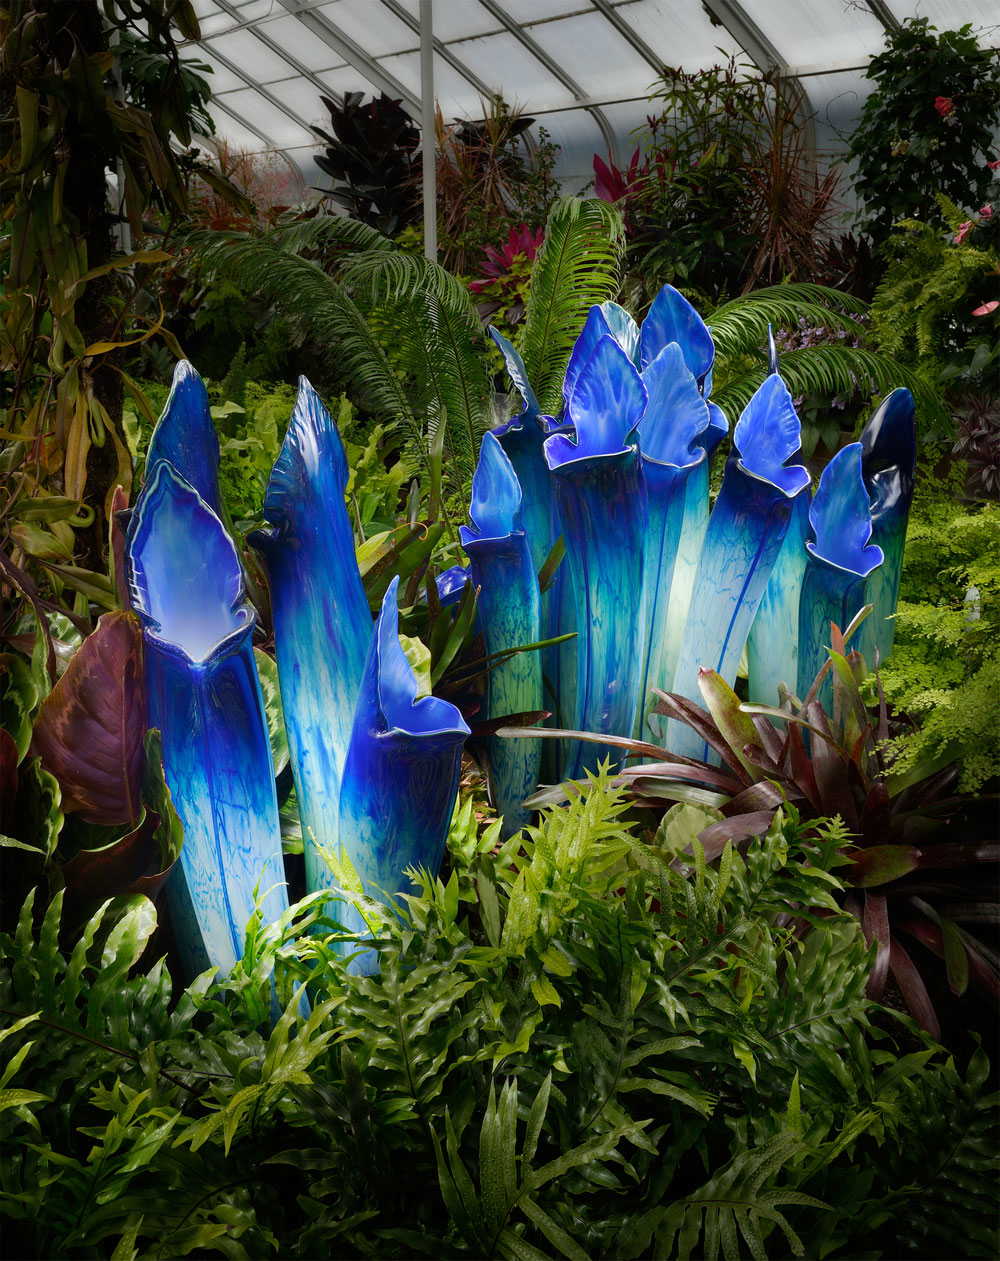 Gigantic And Realistic Flower Sculptures Made From Glass -13